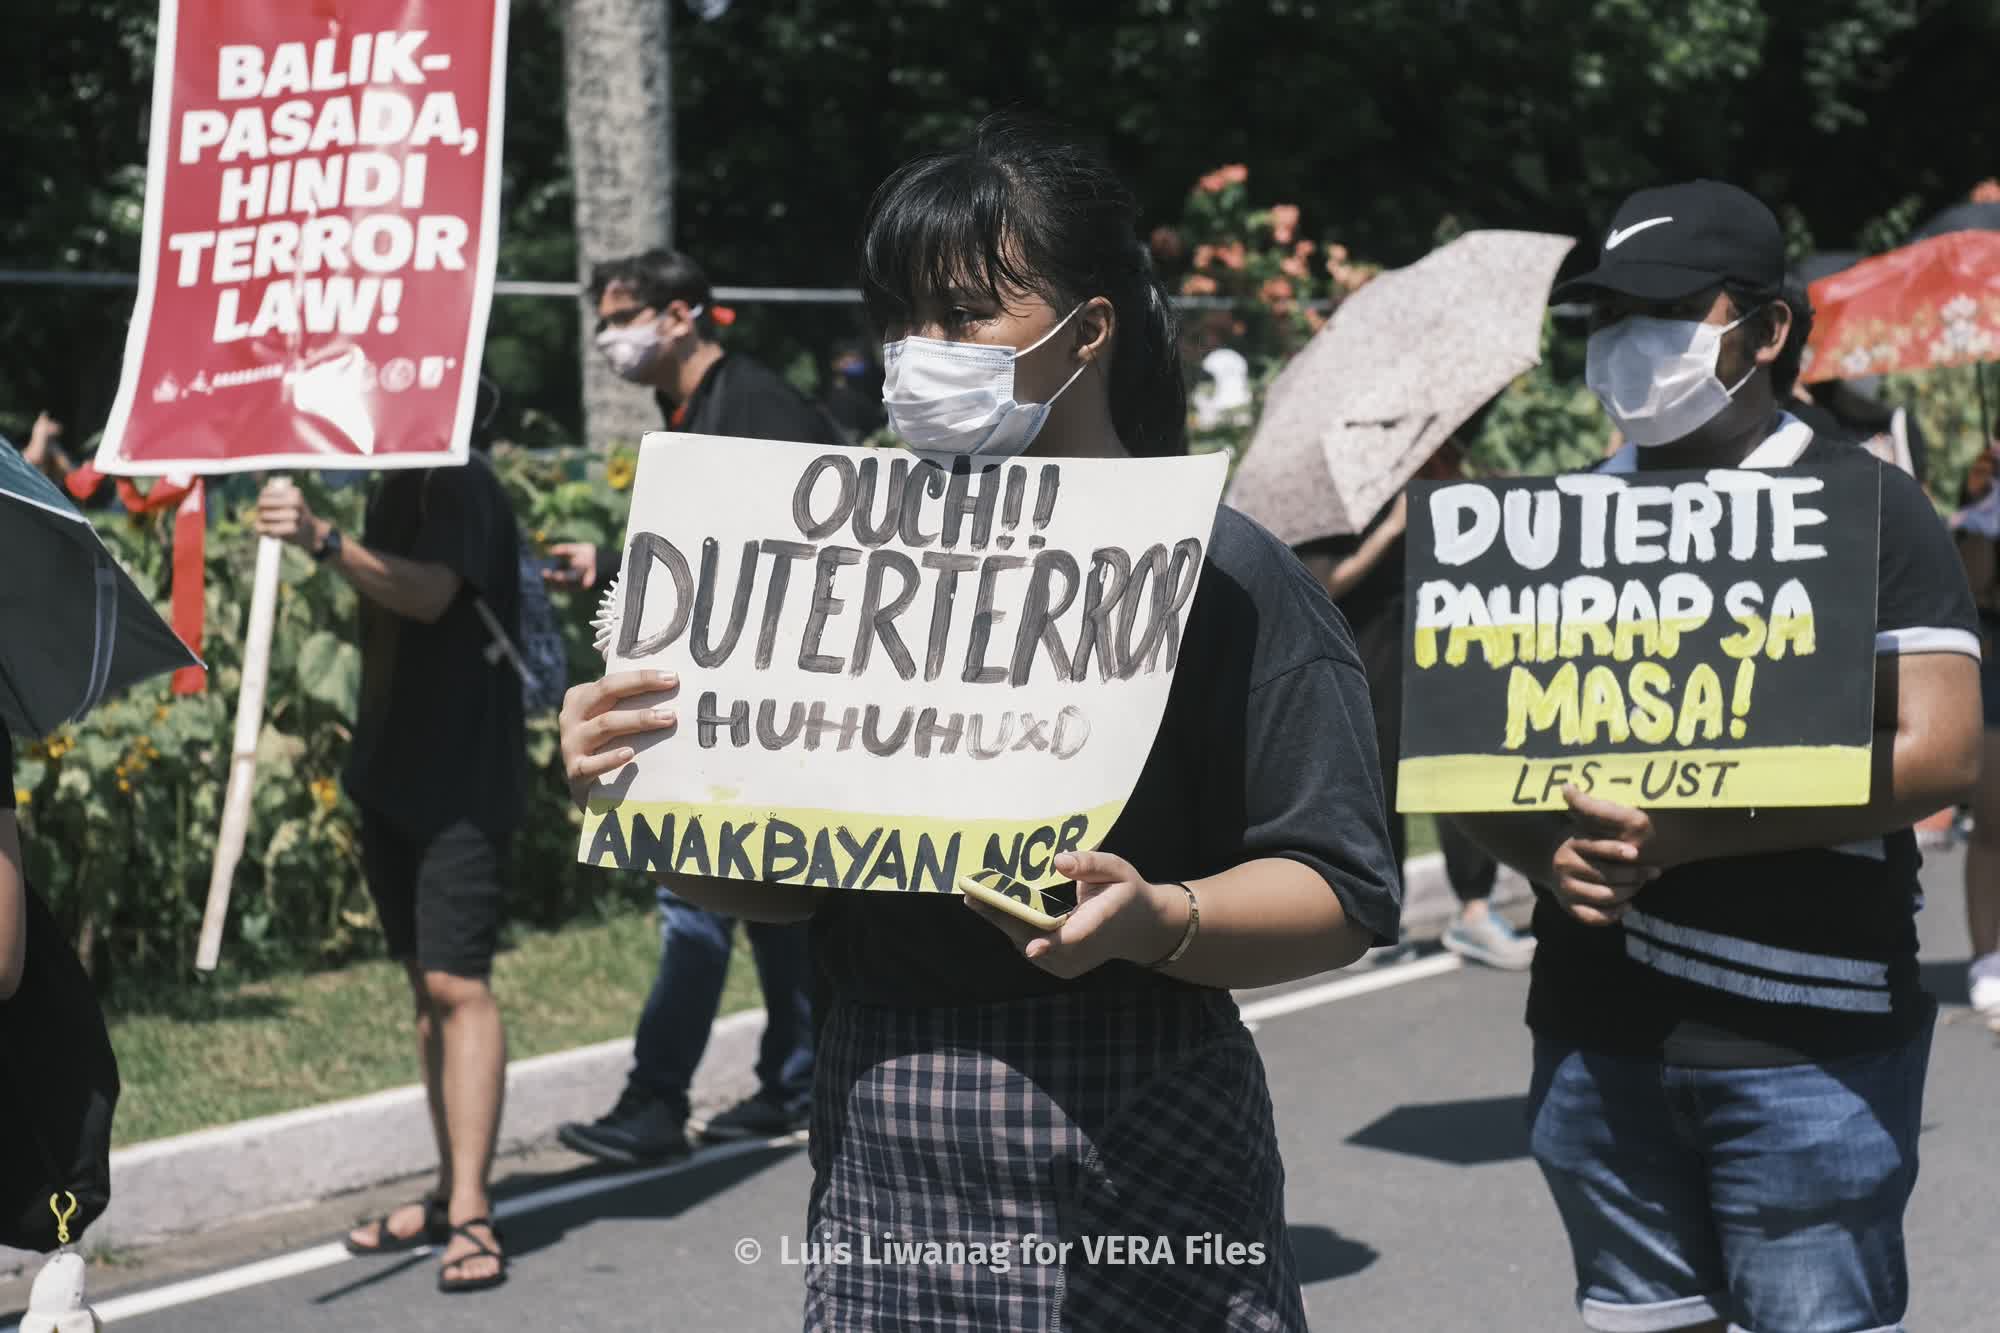 Despite ban, voices of dissent ring loud and clear SONA 2020 1/19  Photos by Luis Liwanag